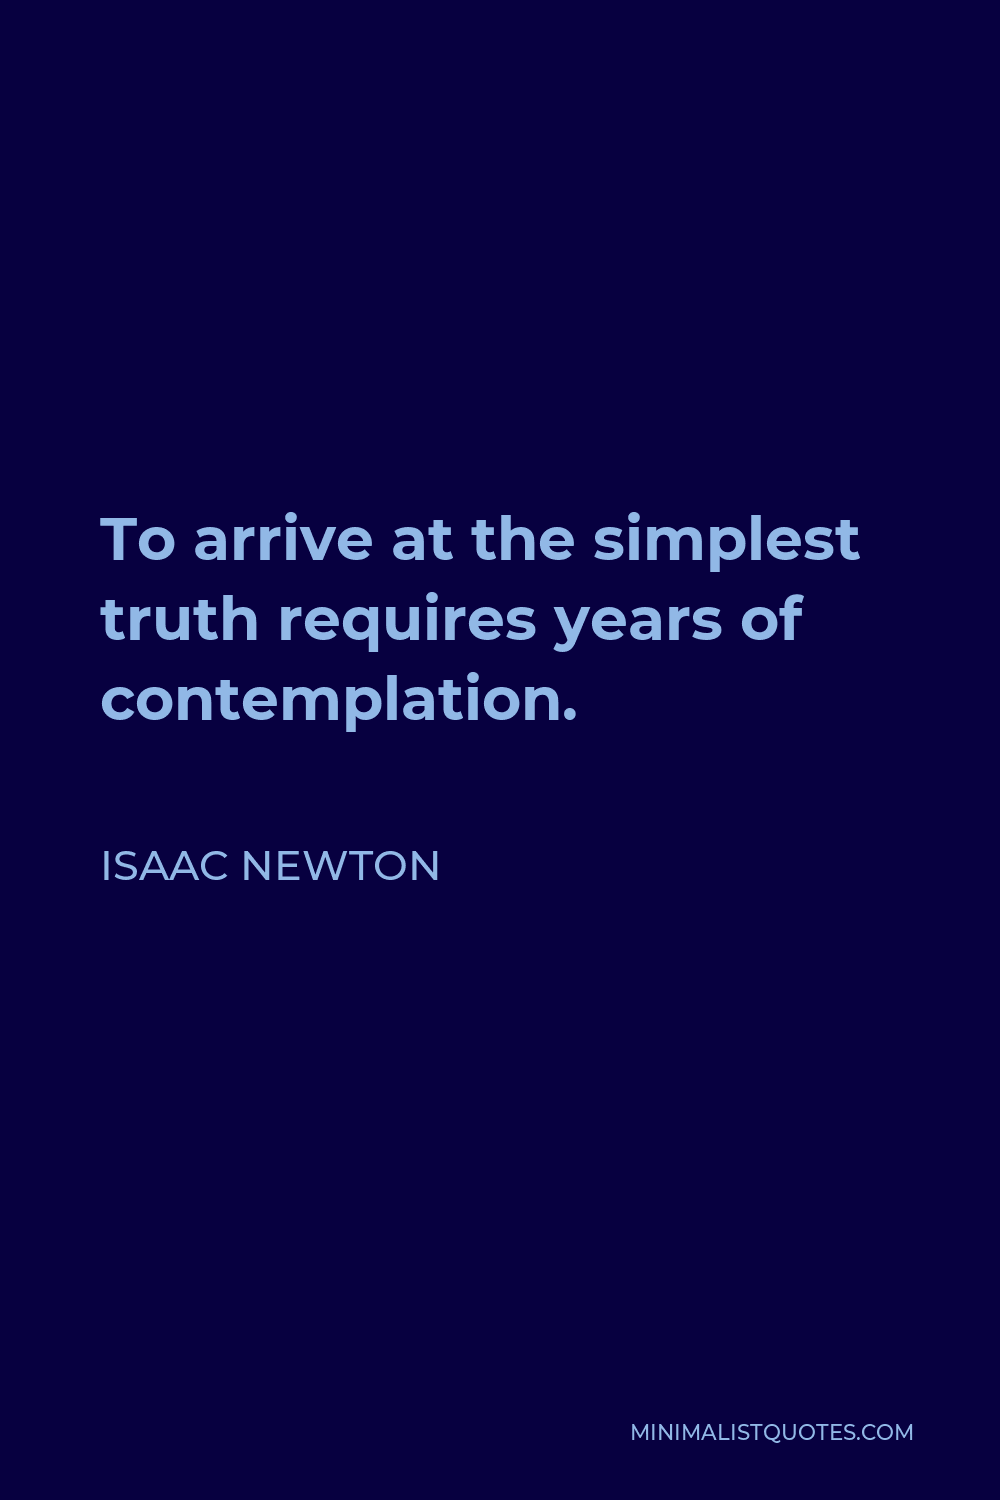 Isaac Newton Quote - To arrive at the simplest truth requires years of contemplation.